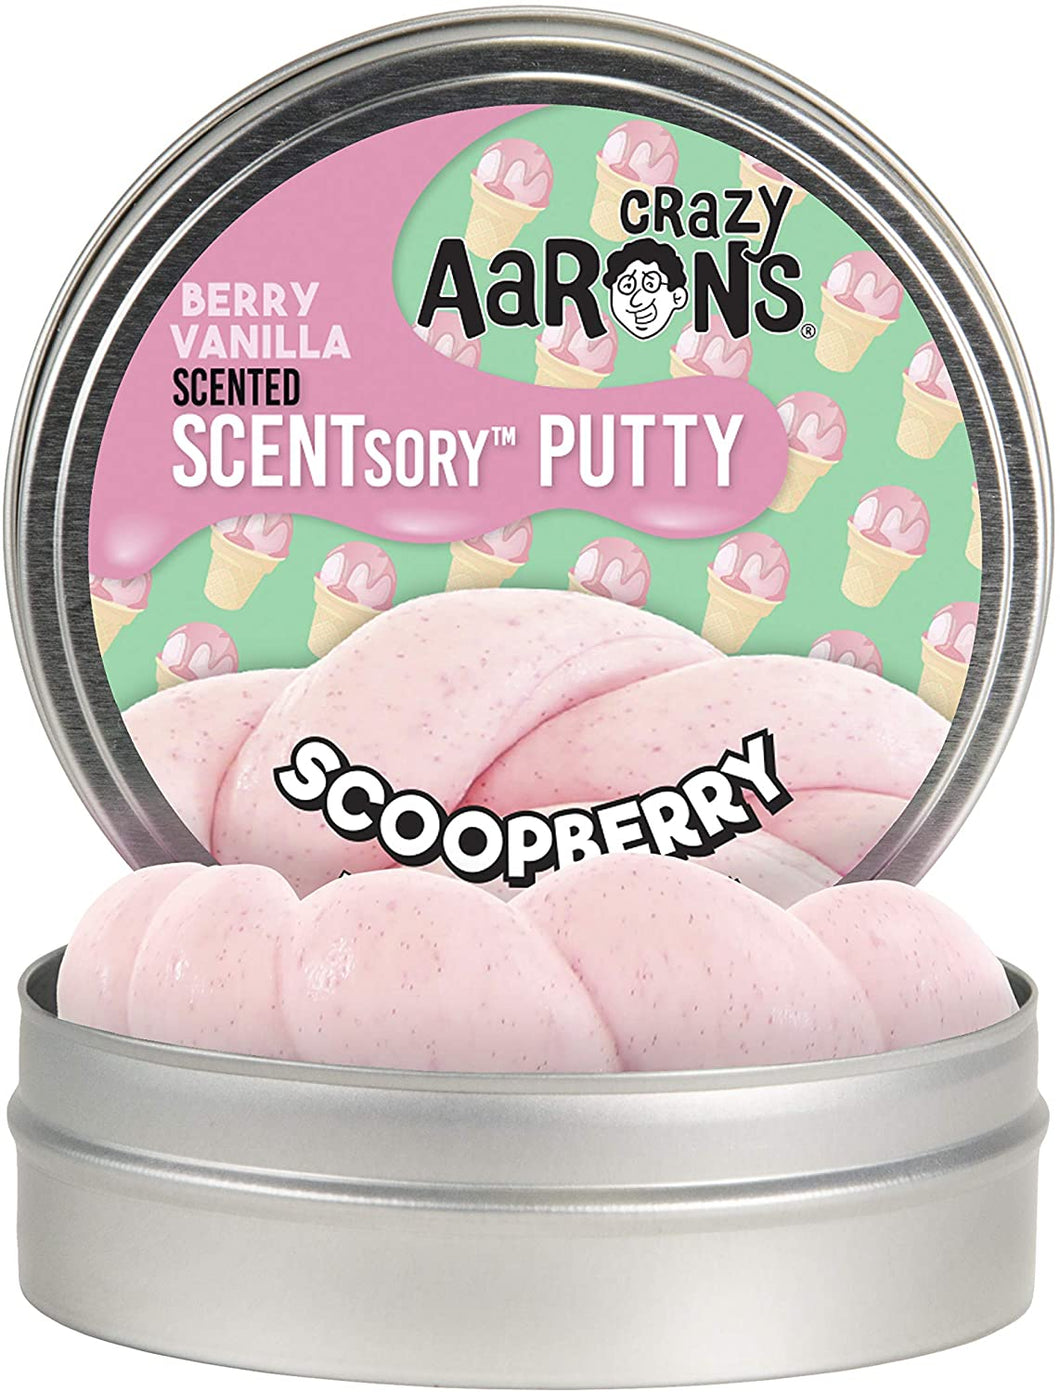 Crazy Aaron's Thinking Putty - Scentsory Treat: Scoopberry - Fidget Toy - Stretch, Play and Create -  Strawberry Vanilla Scented Pink Color That Never Dries Out - 2.75